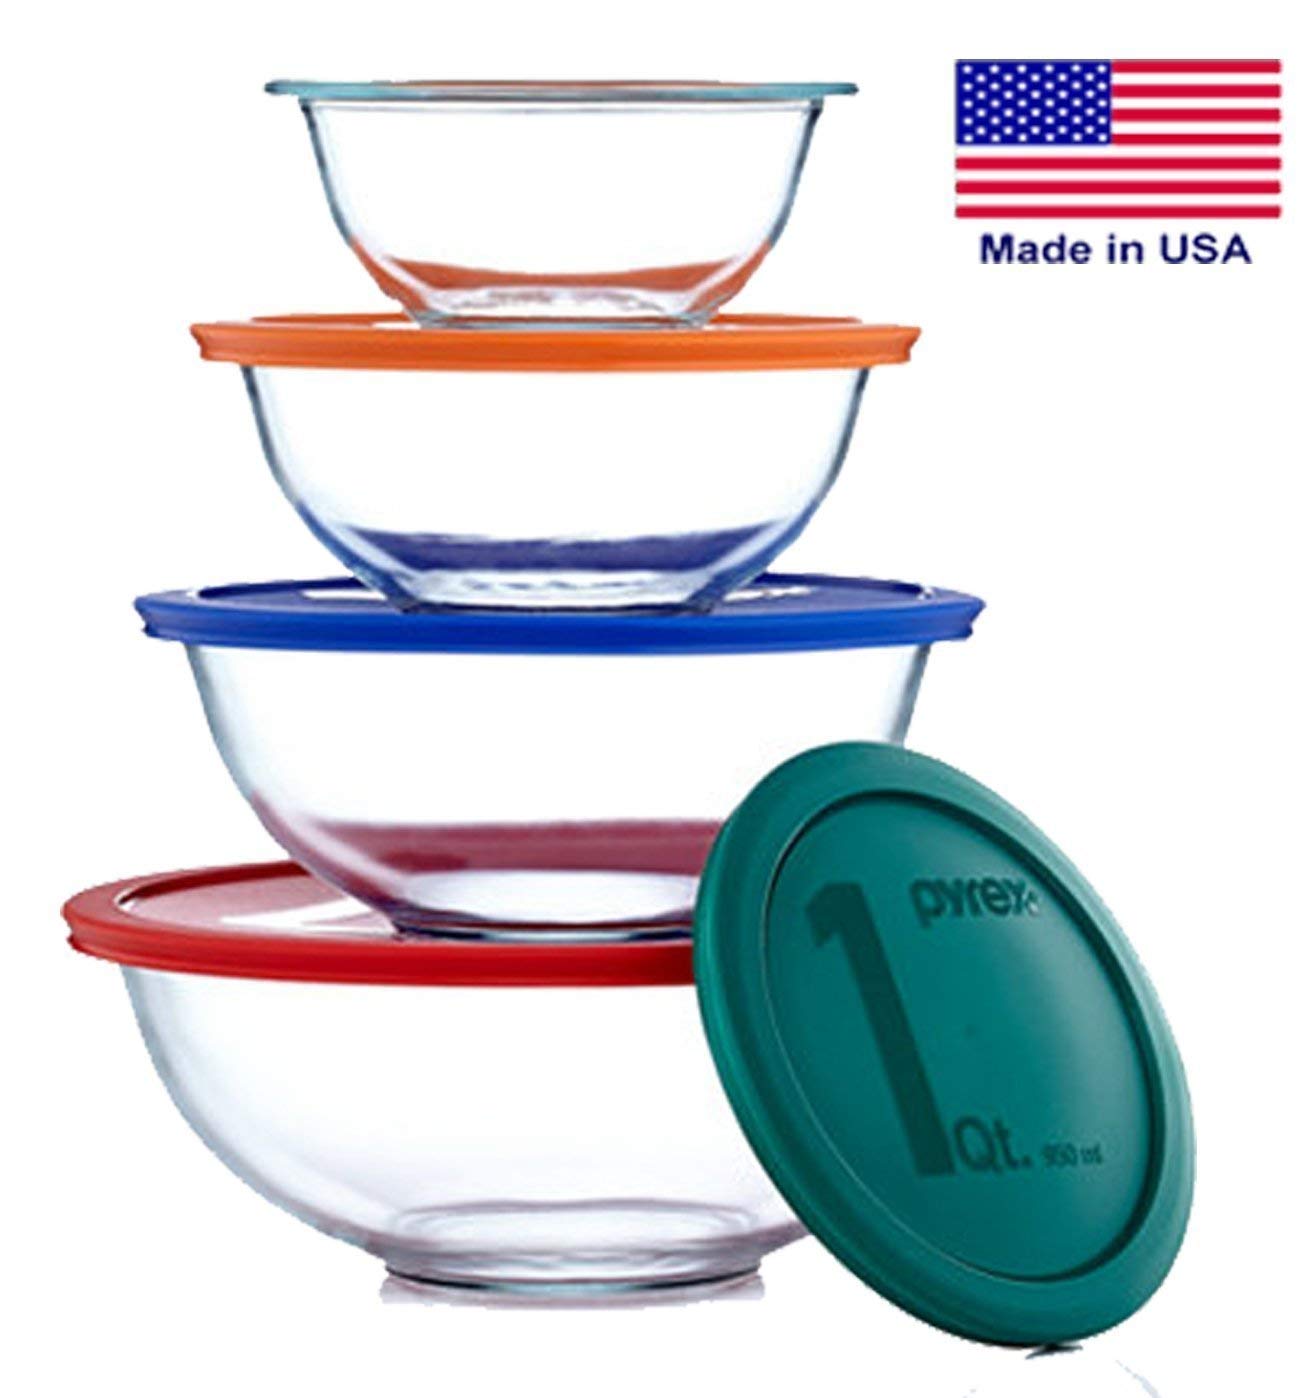 bowl clipart stacked bowl